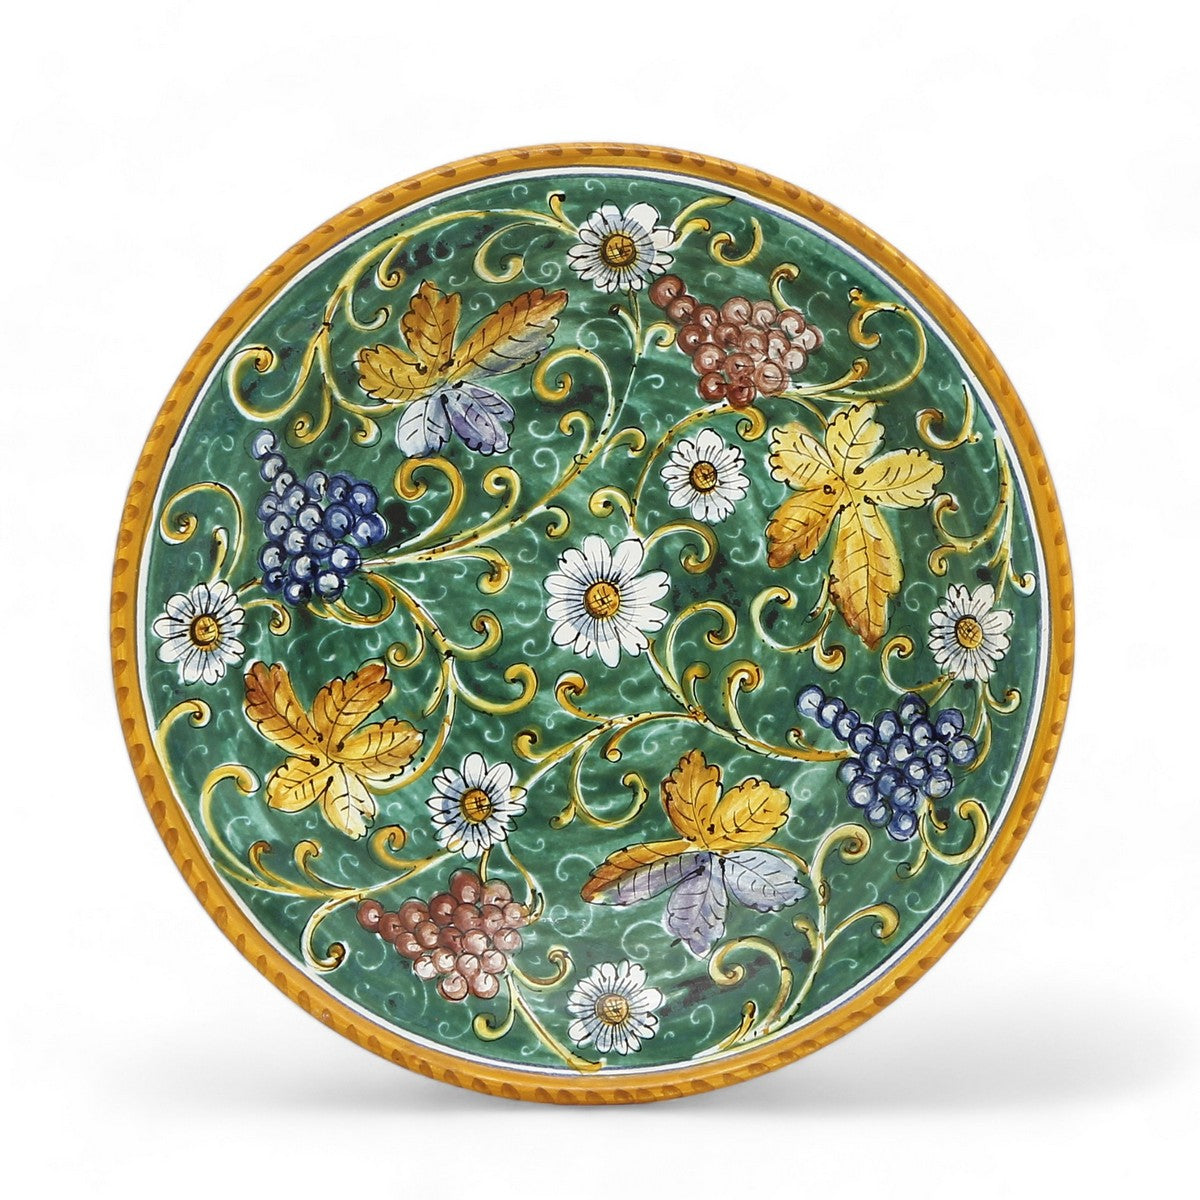 TUSCAN MAJOLICA: Medium wall plate featuring assorted fruits and foliage on a green background